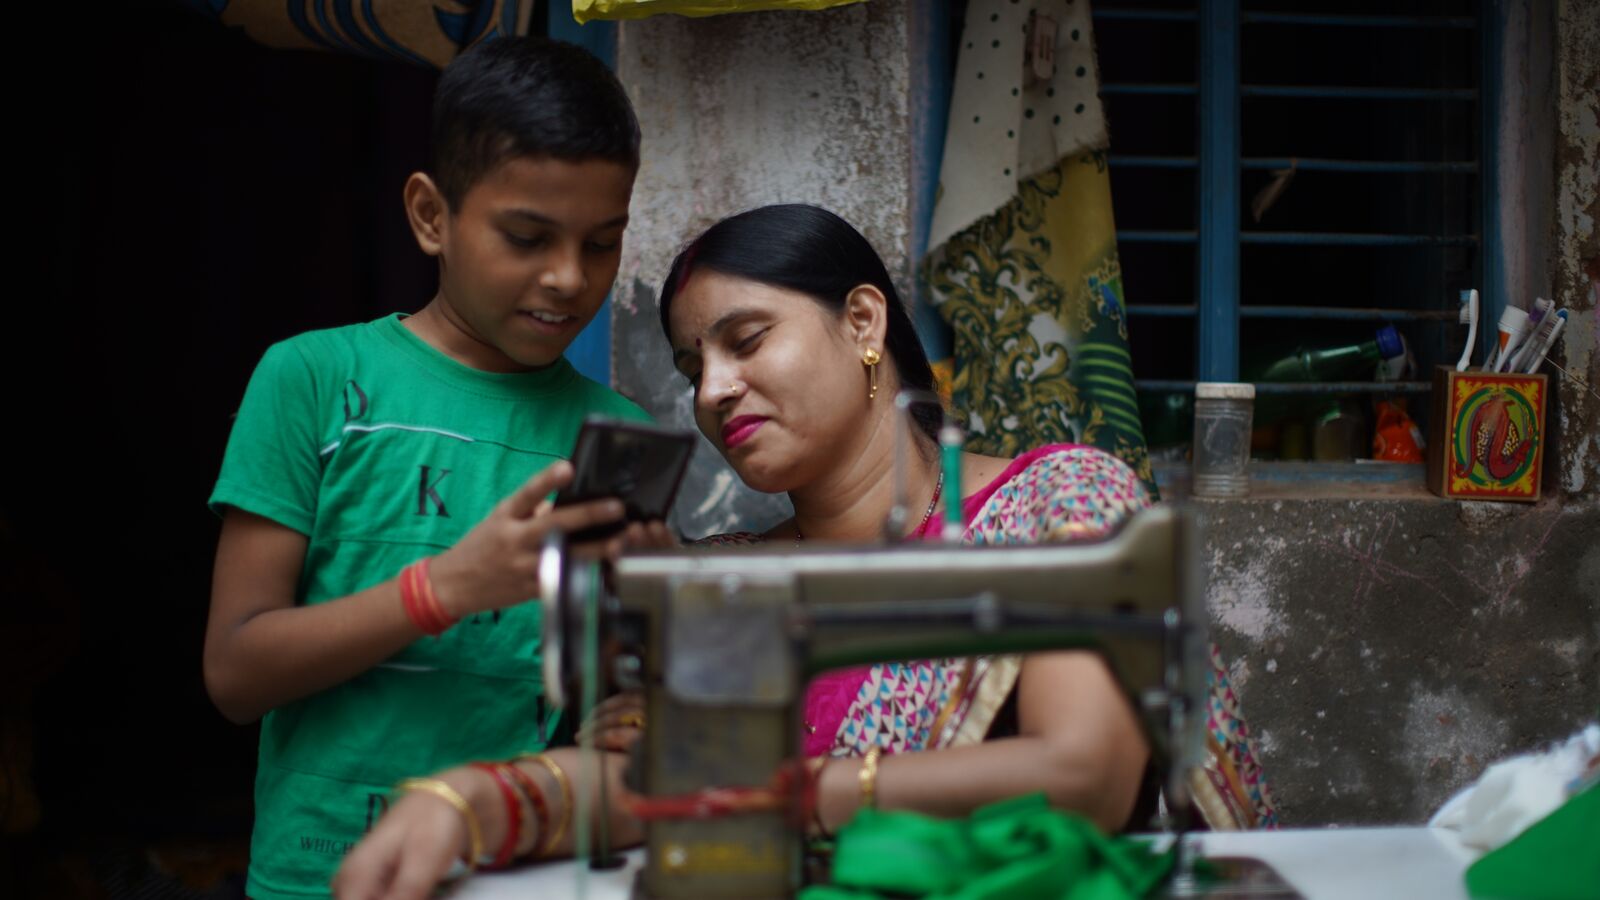 A mother and son in India look at the son's school work on a phone